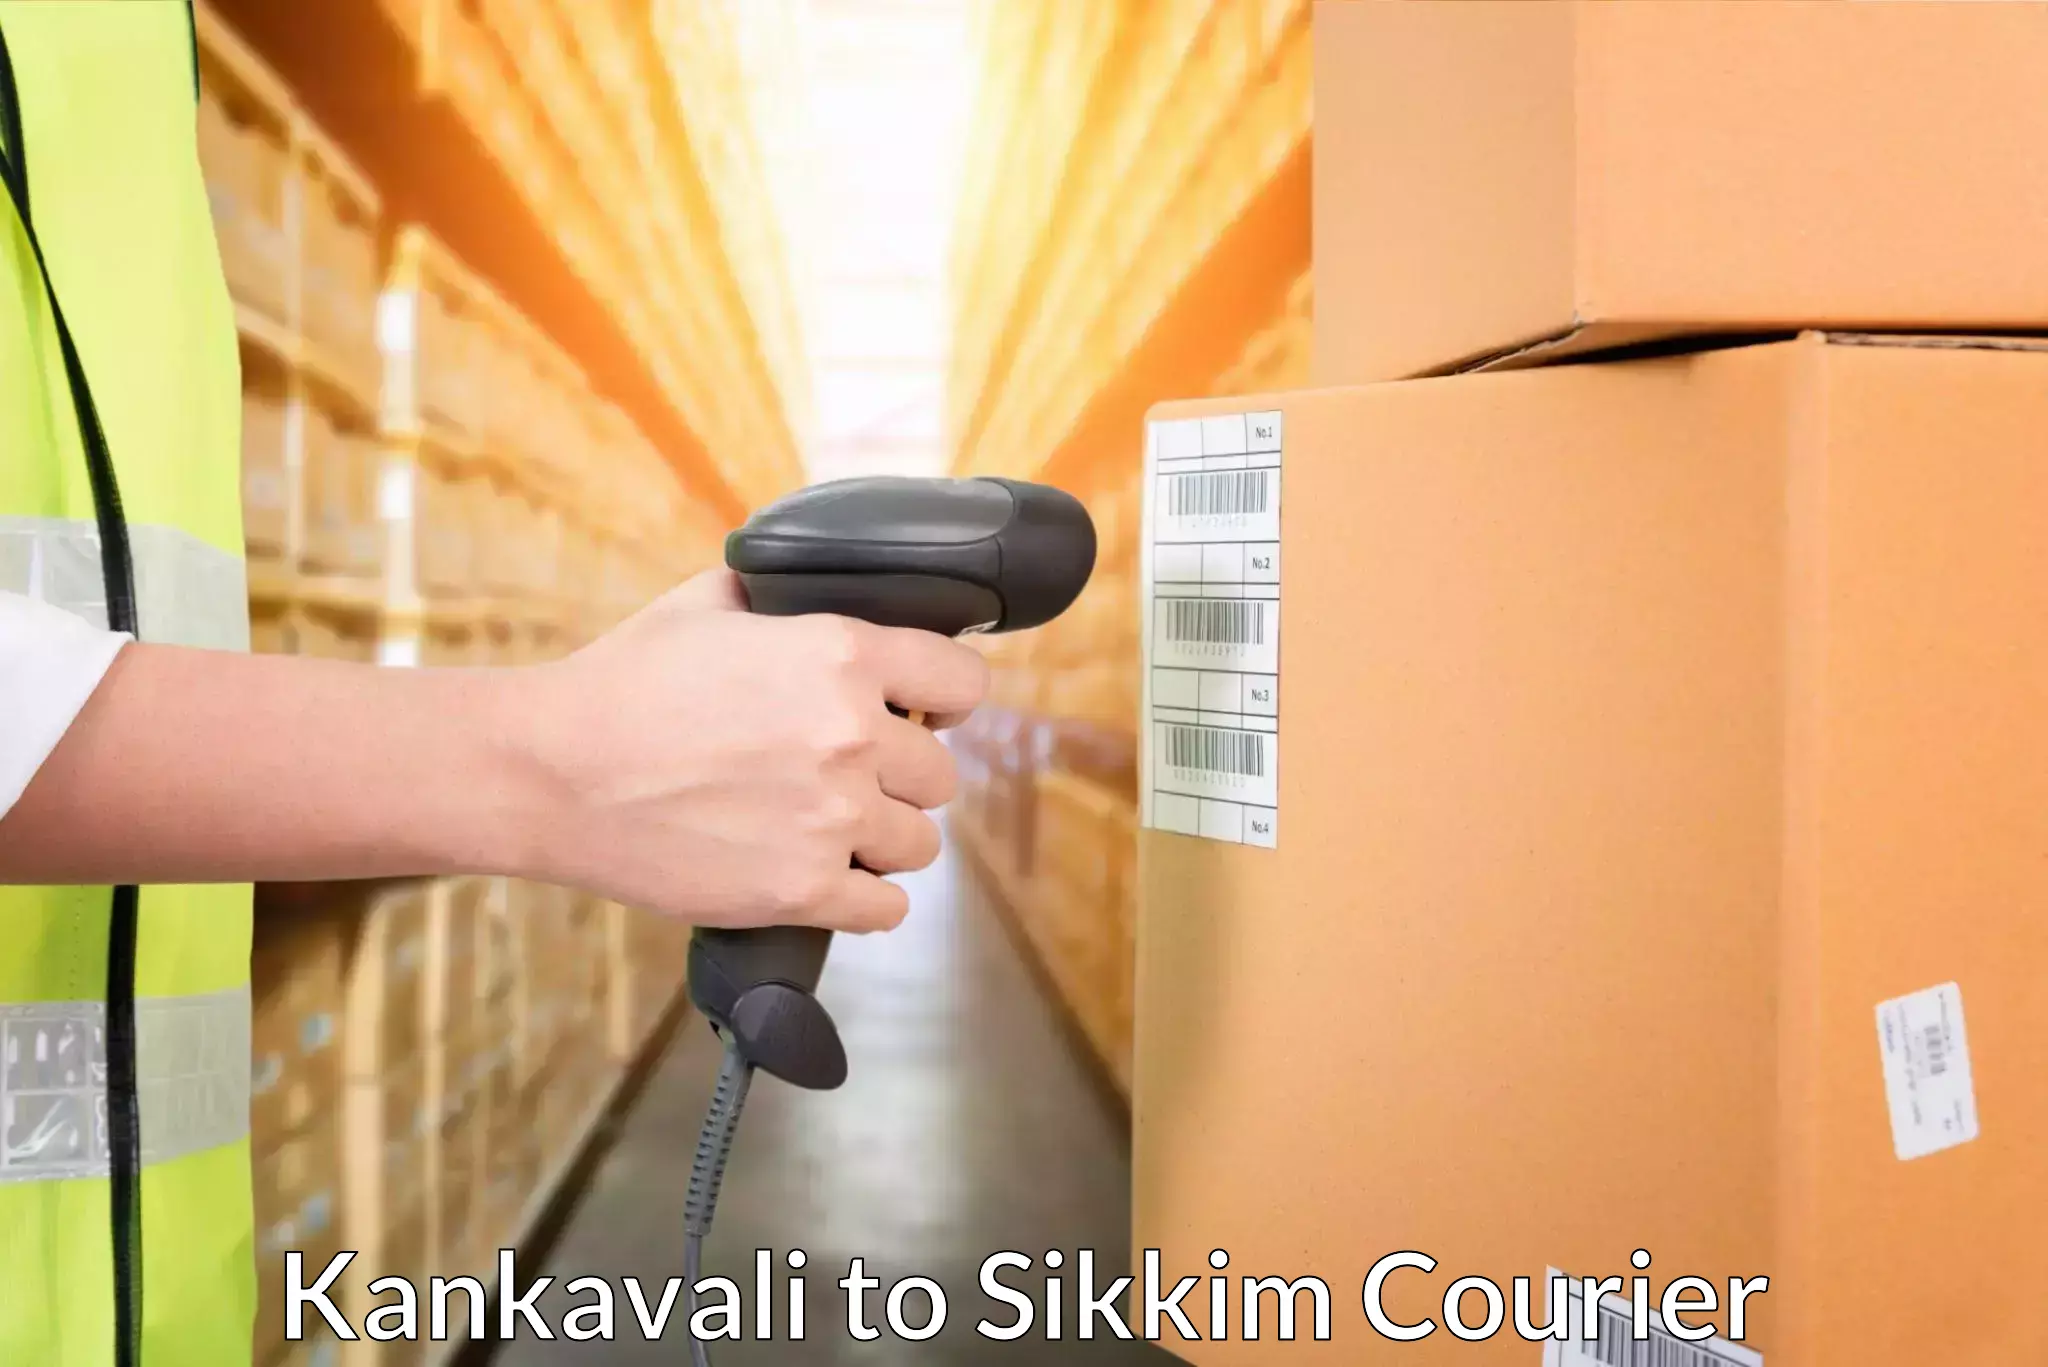 Courier service efficiency Kankavali to Pelling